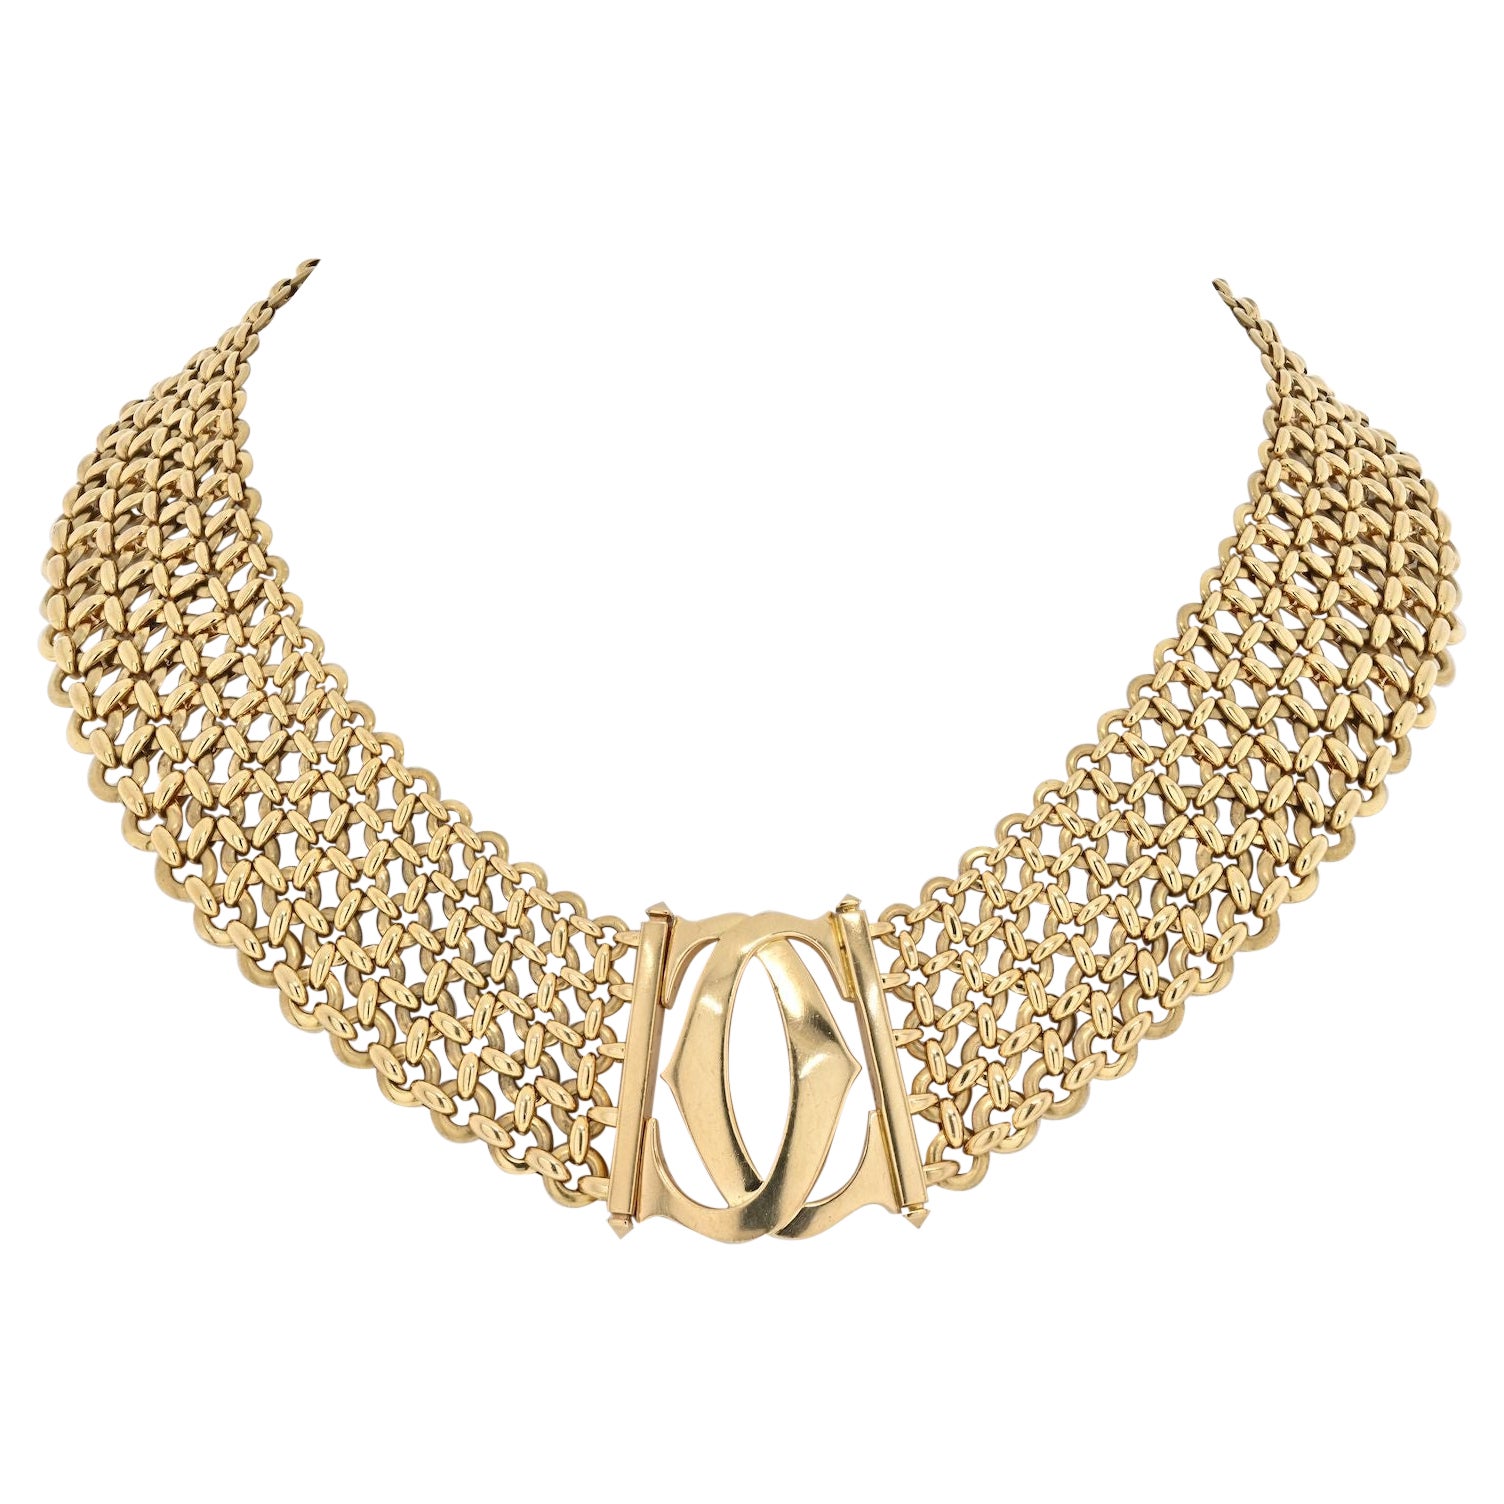 Cartier Yellow Gold Double C Three Row Wide Link Penelope Necklace